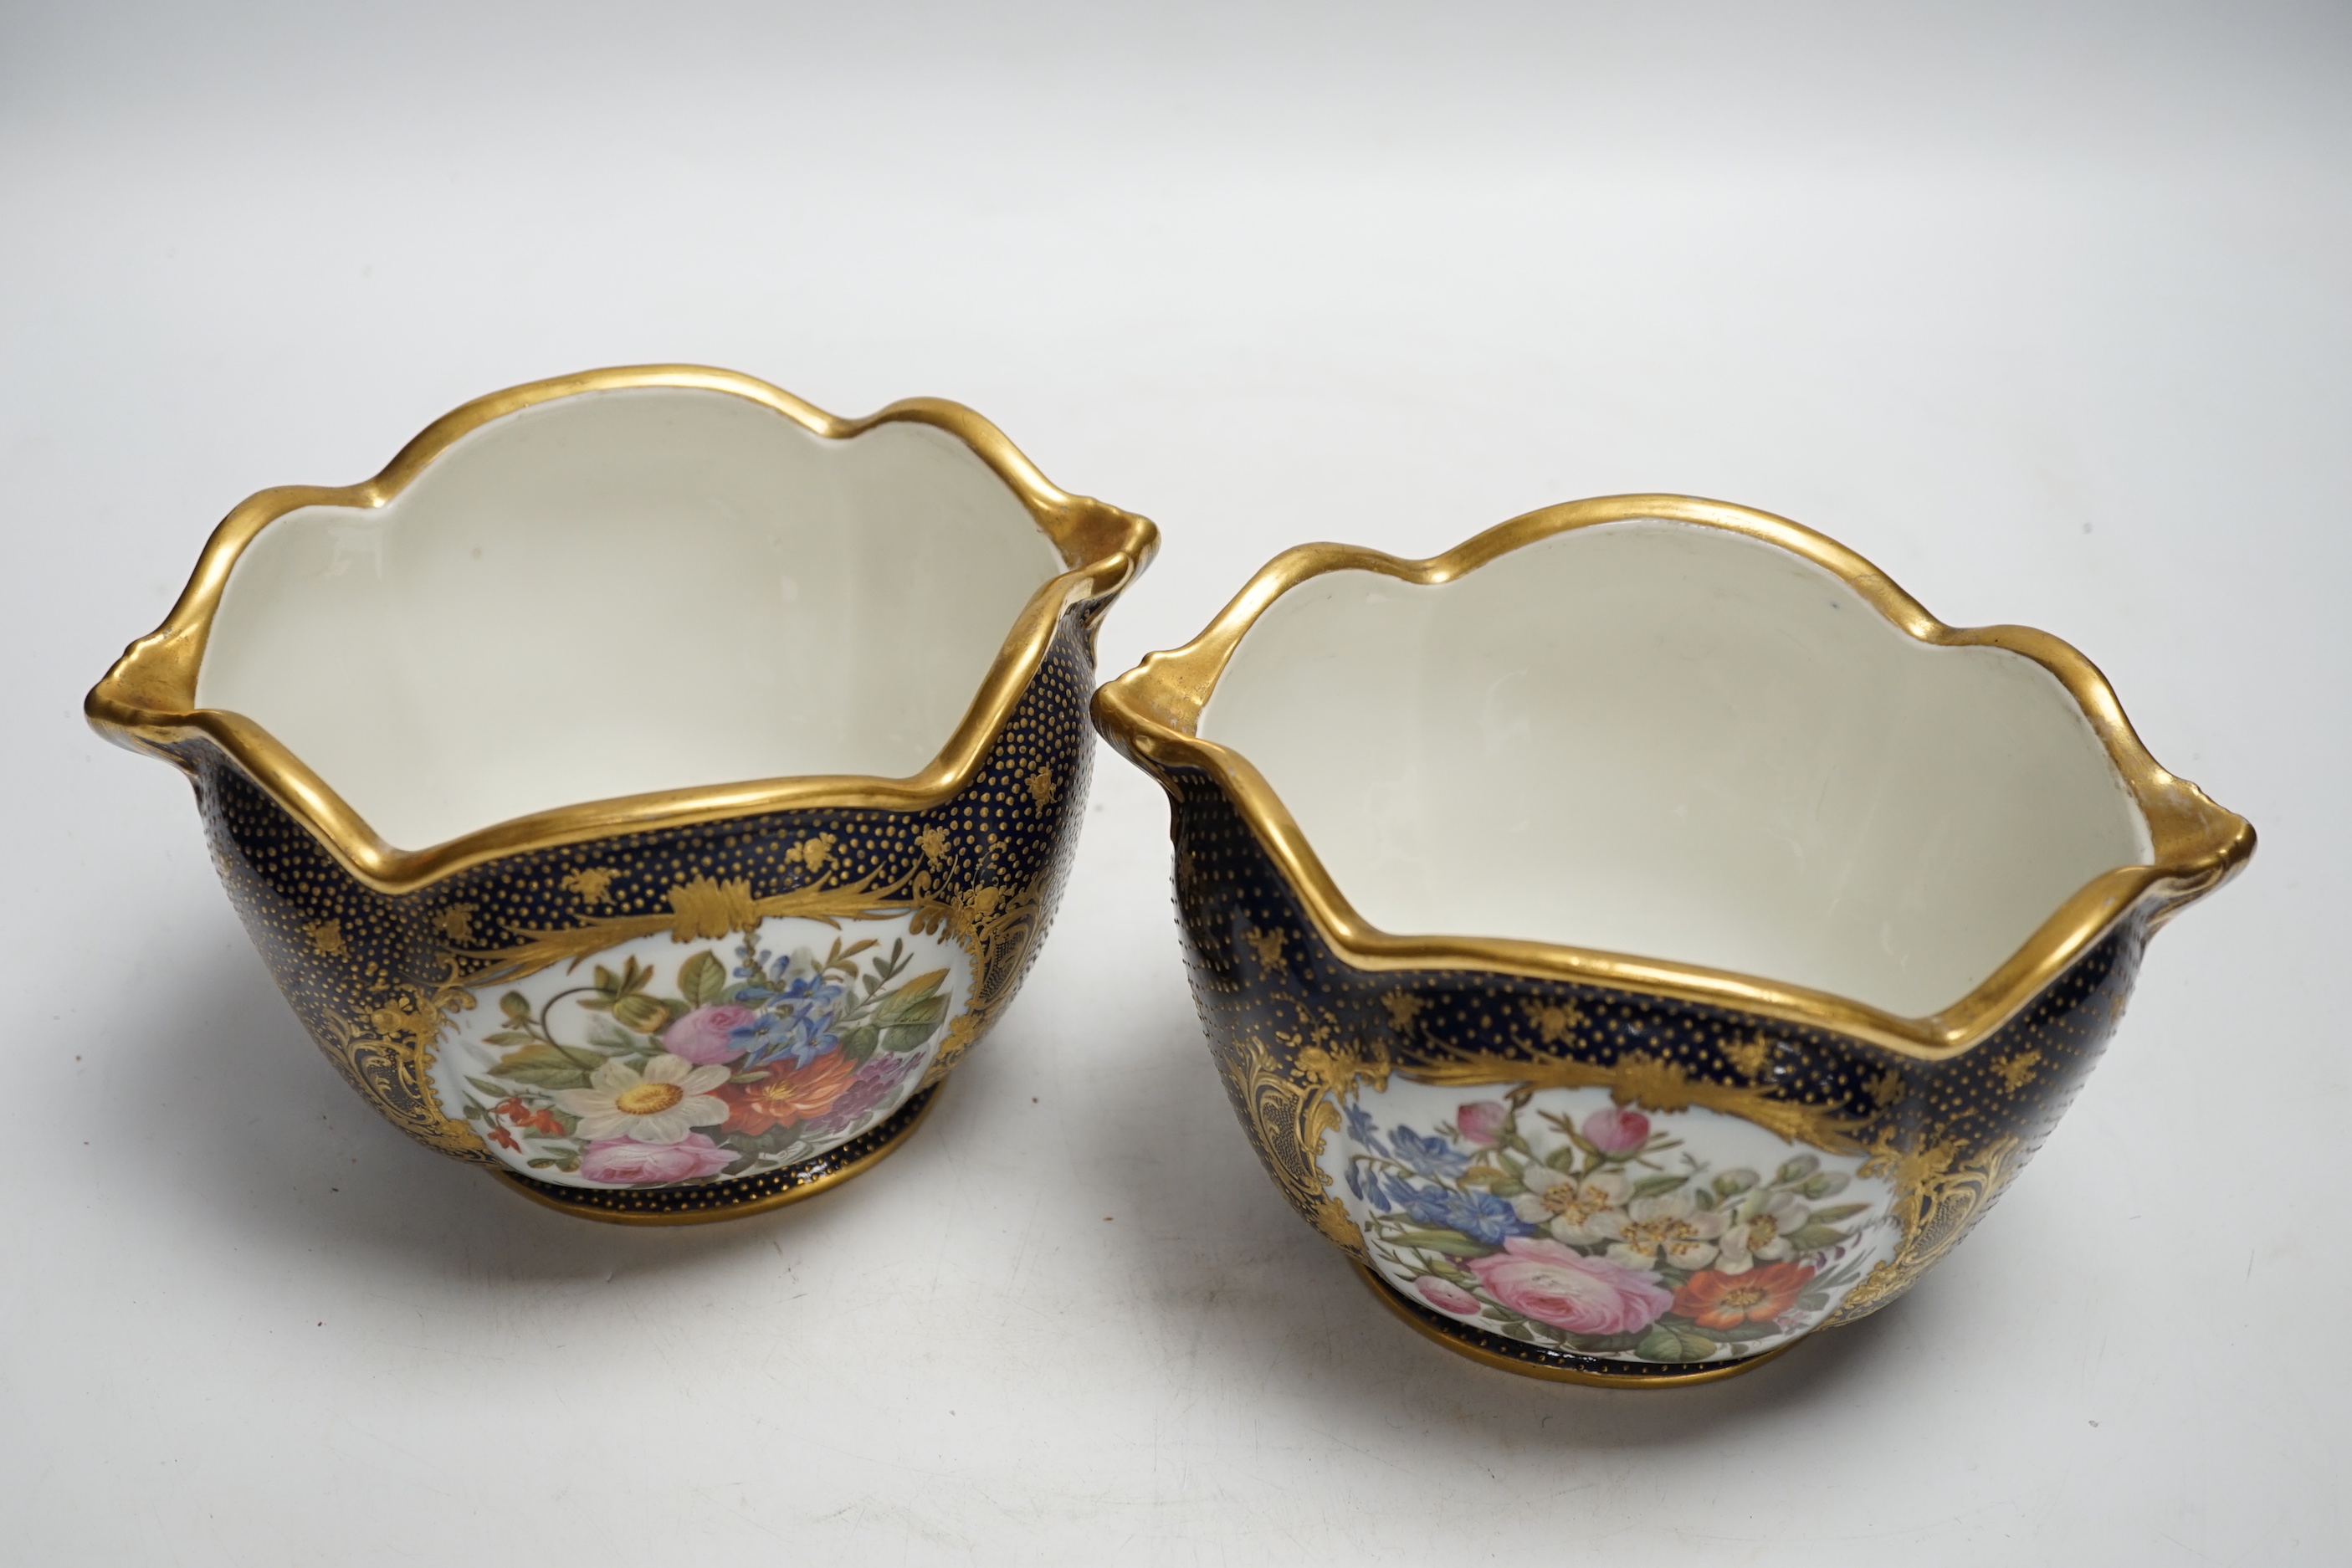 A pair of 19th century Paris porcelain cache pot hand painted with flowers and gilded decoration, 12cm high